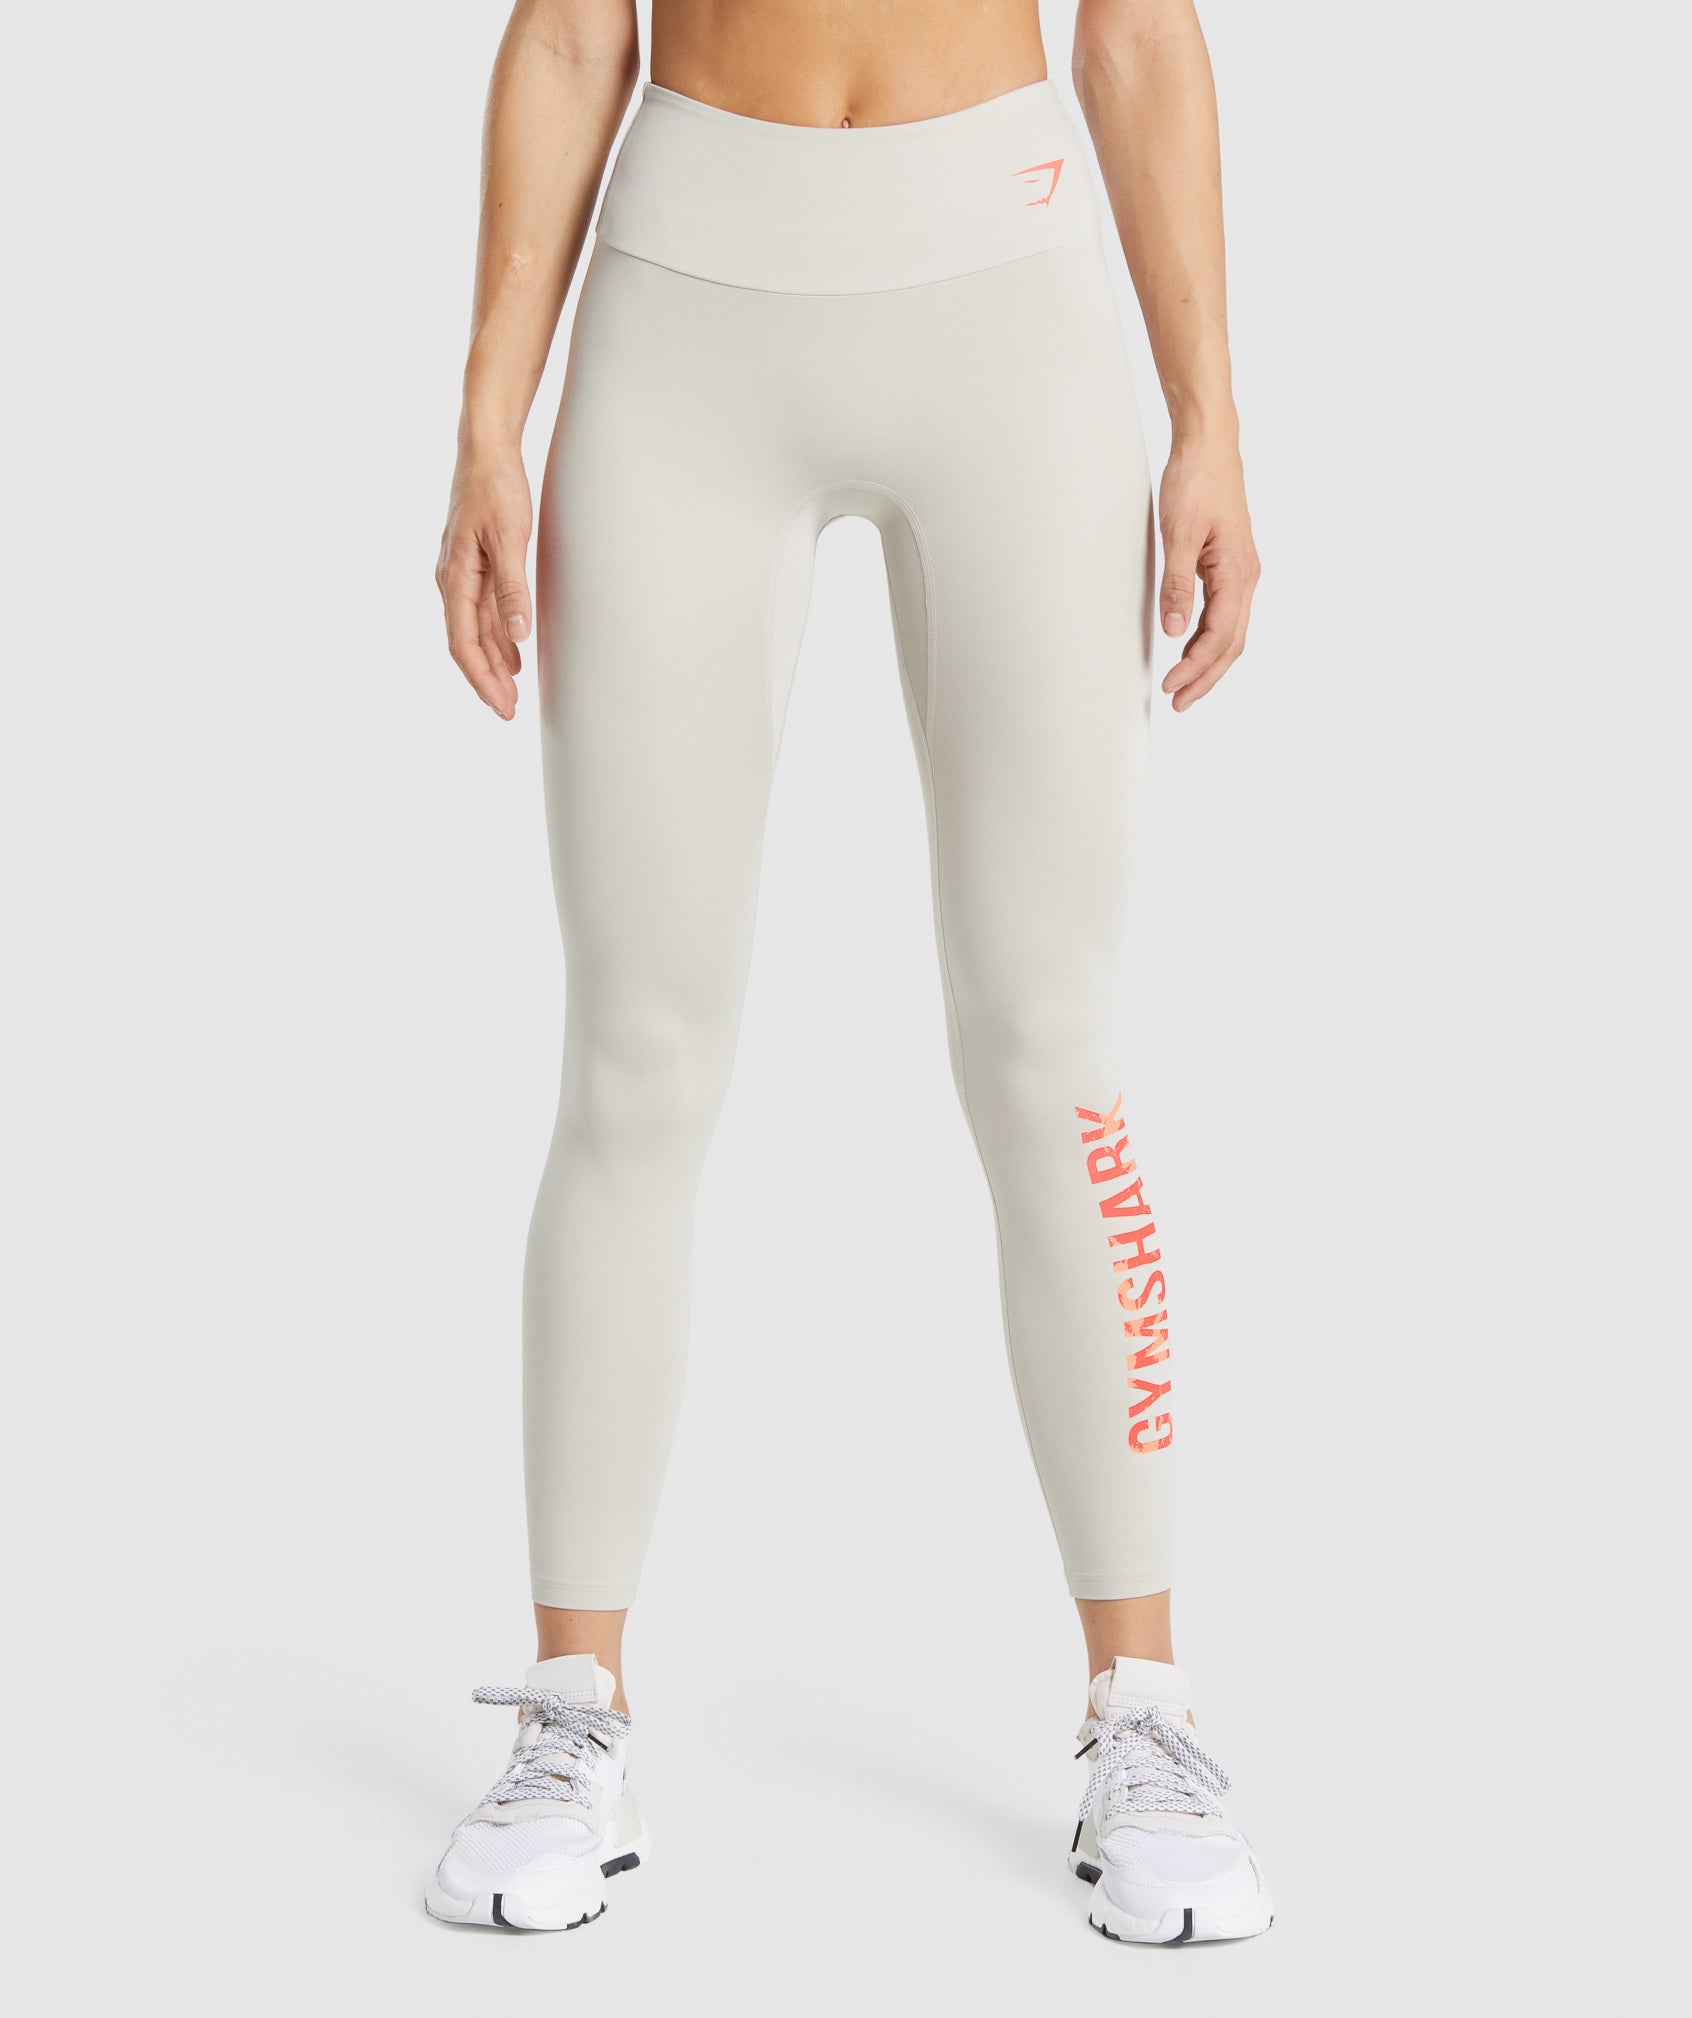 Training Graphic Leggings in {{variantColor} is out of stock